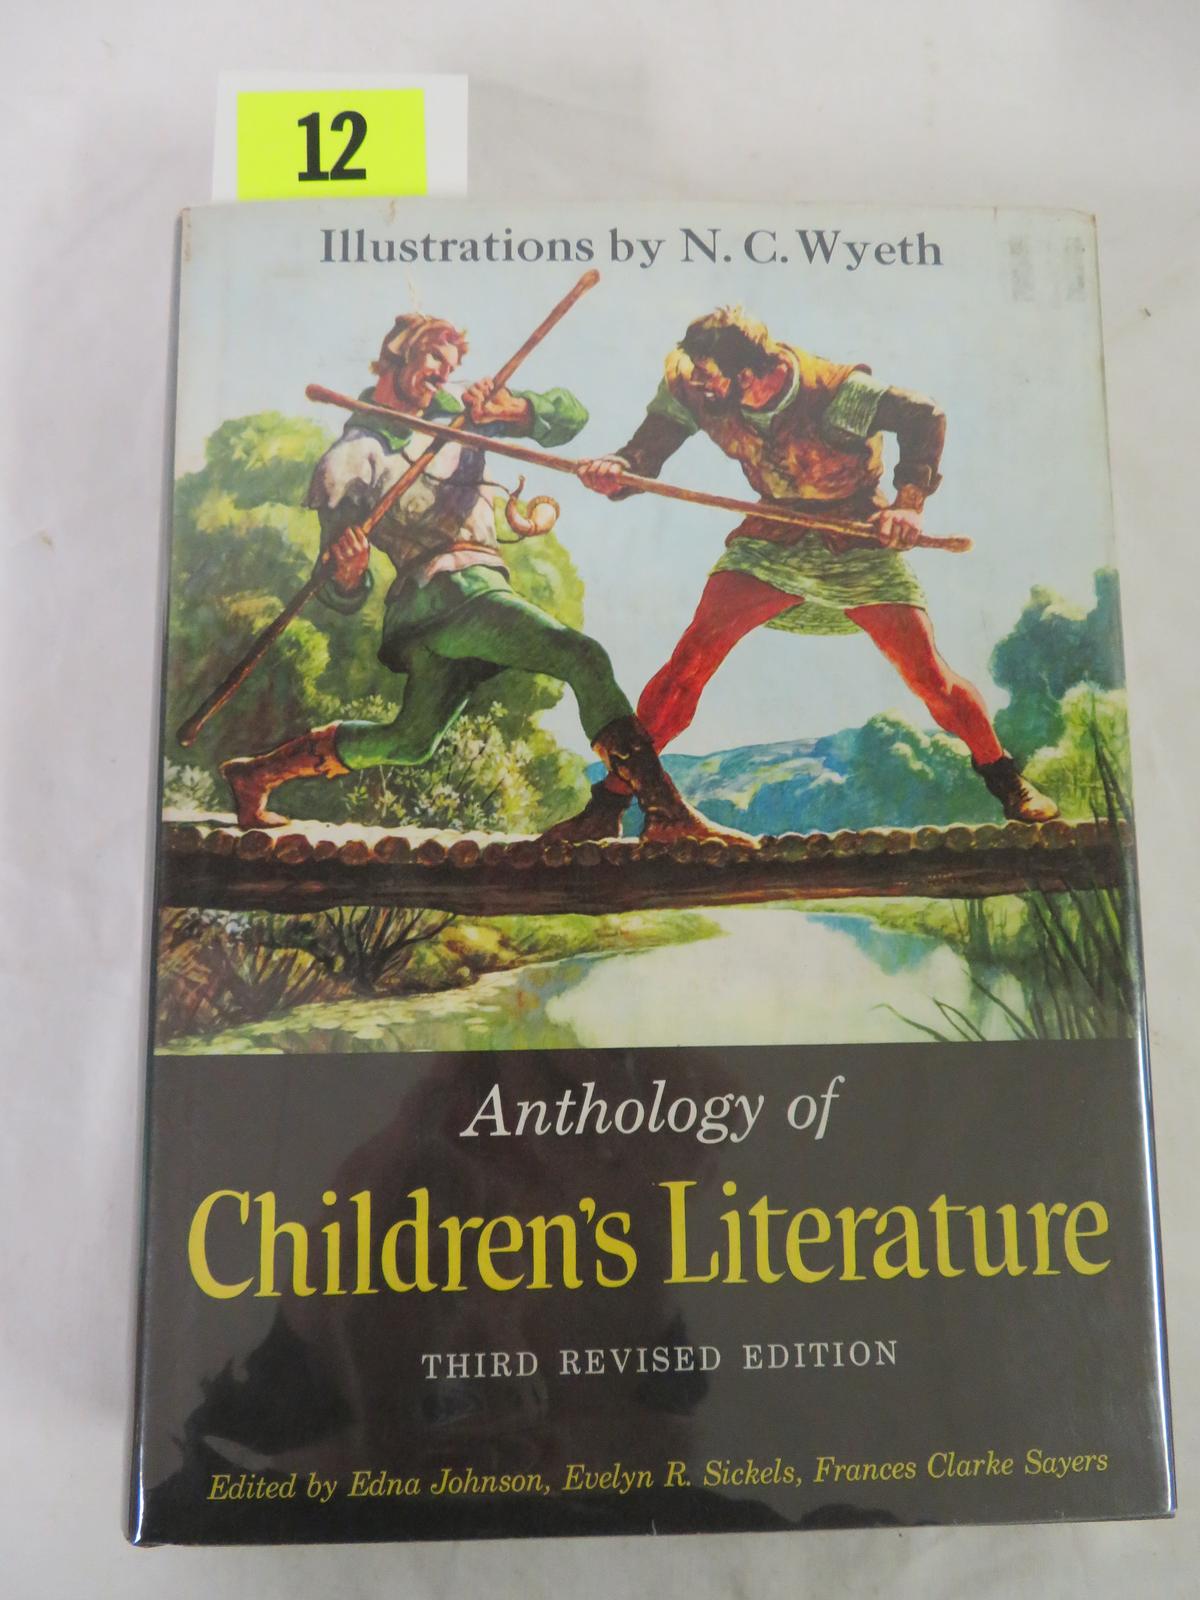 "anthology Of Children's Literature" Hardcover Illustrated Book (1959)